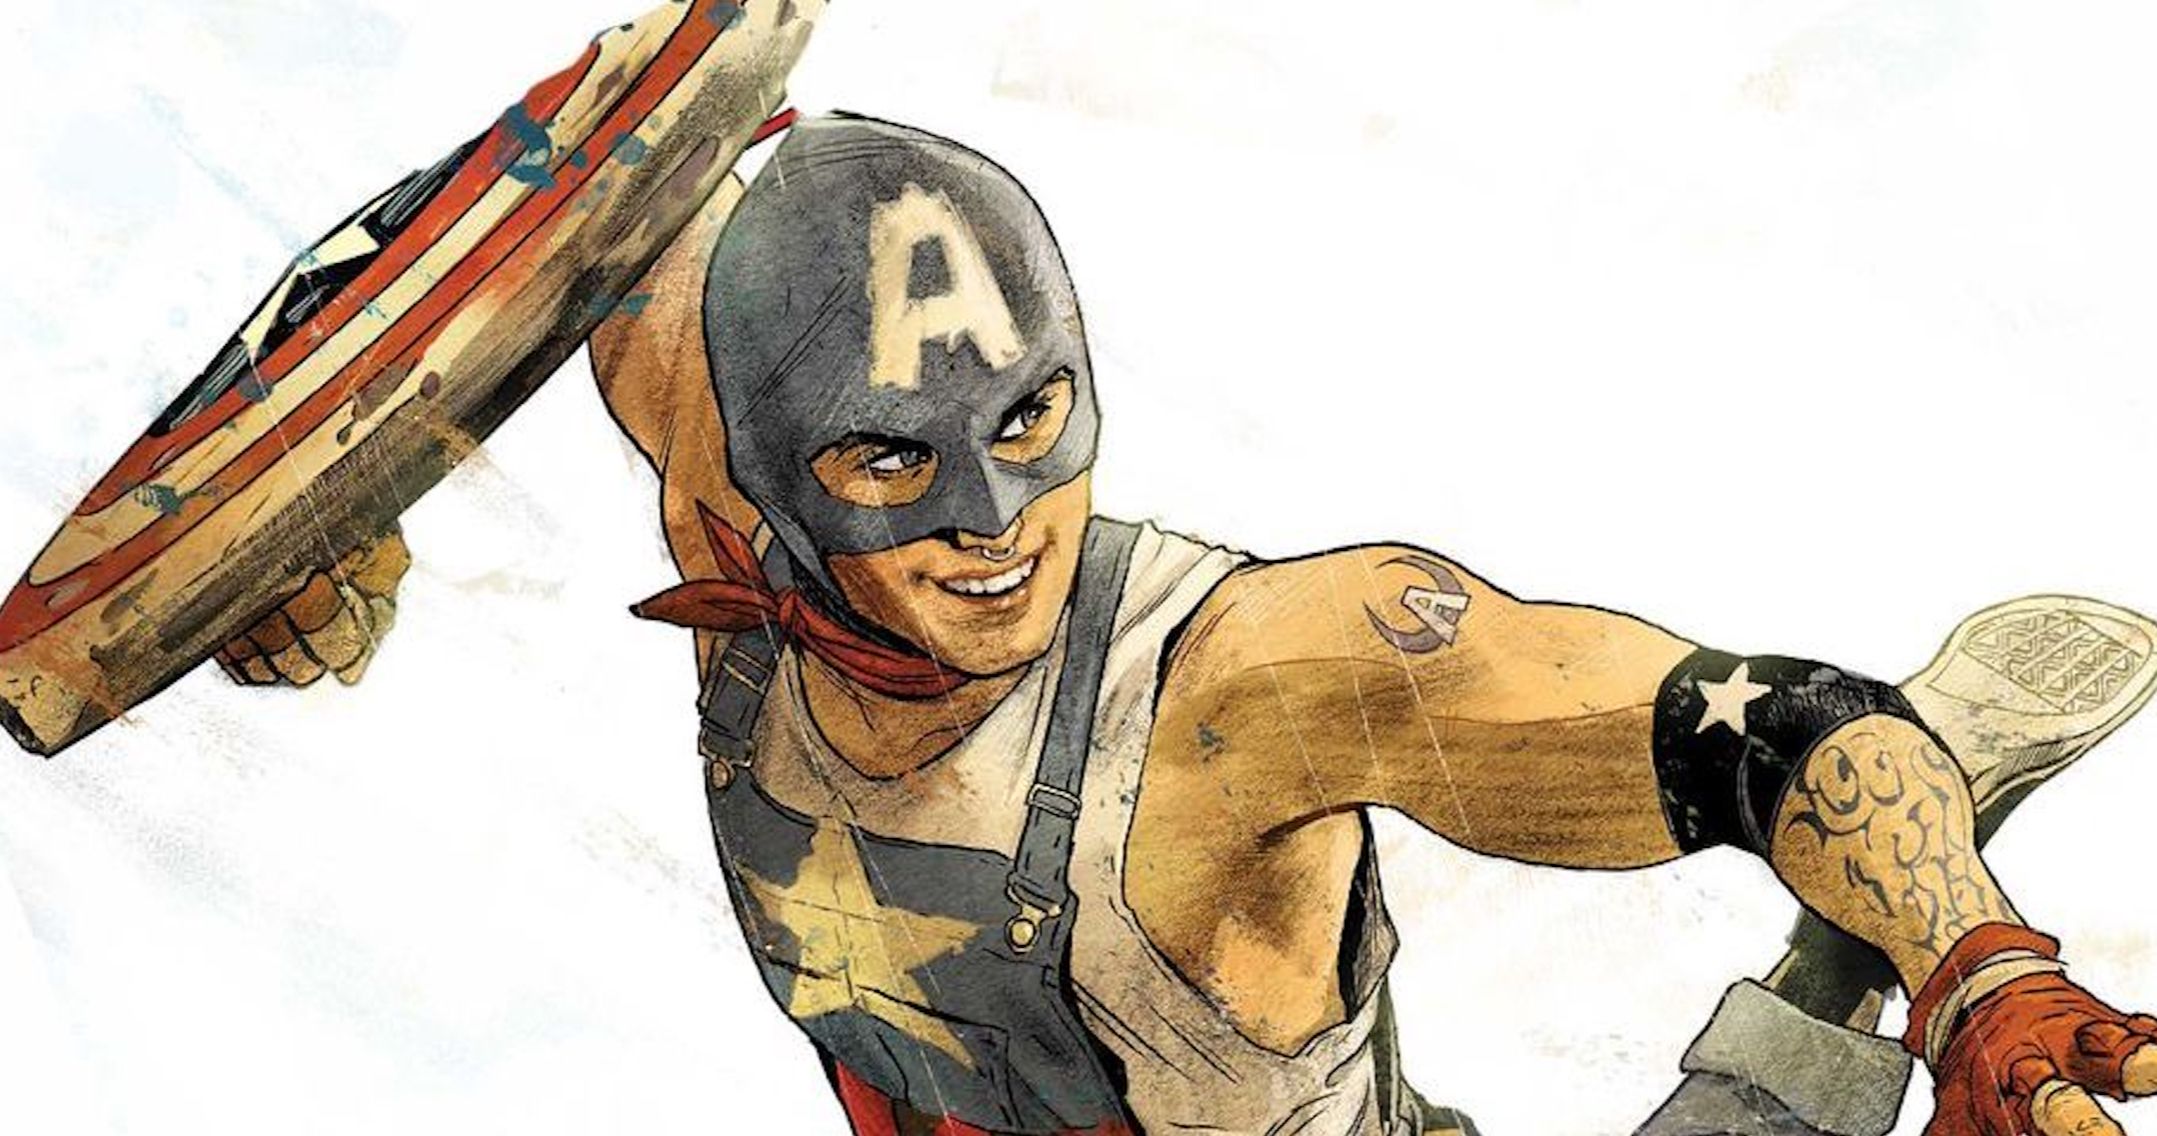 Marvel Comics Introduces an LGBTQ+ Captain America for Pride Month